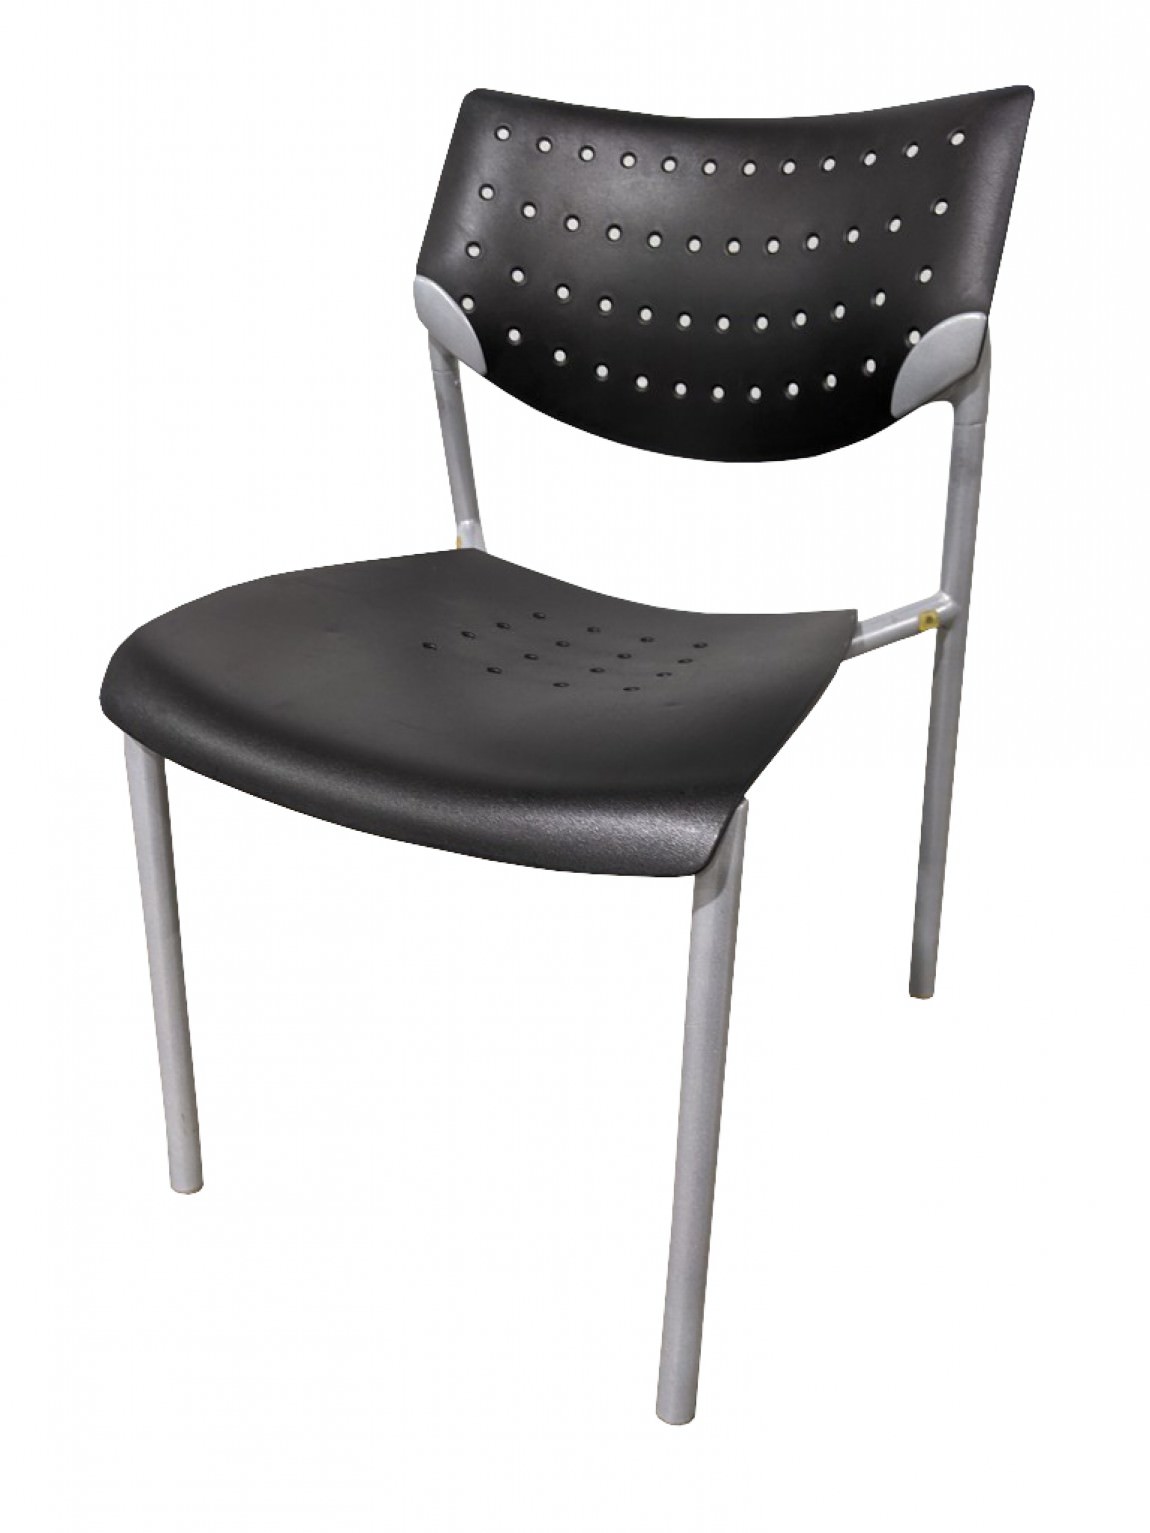 Black Plastic Stacking Guest Chairs with Metal Legs